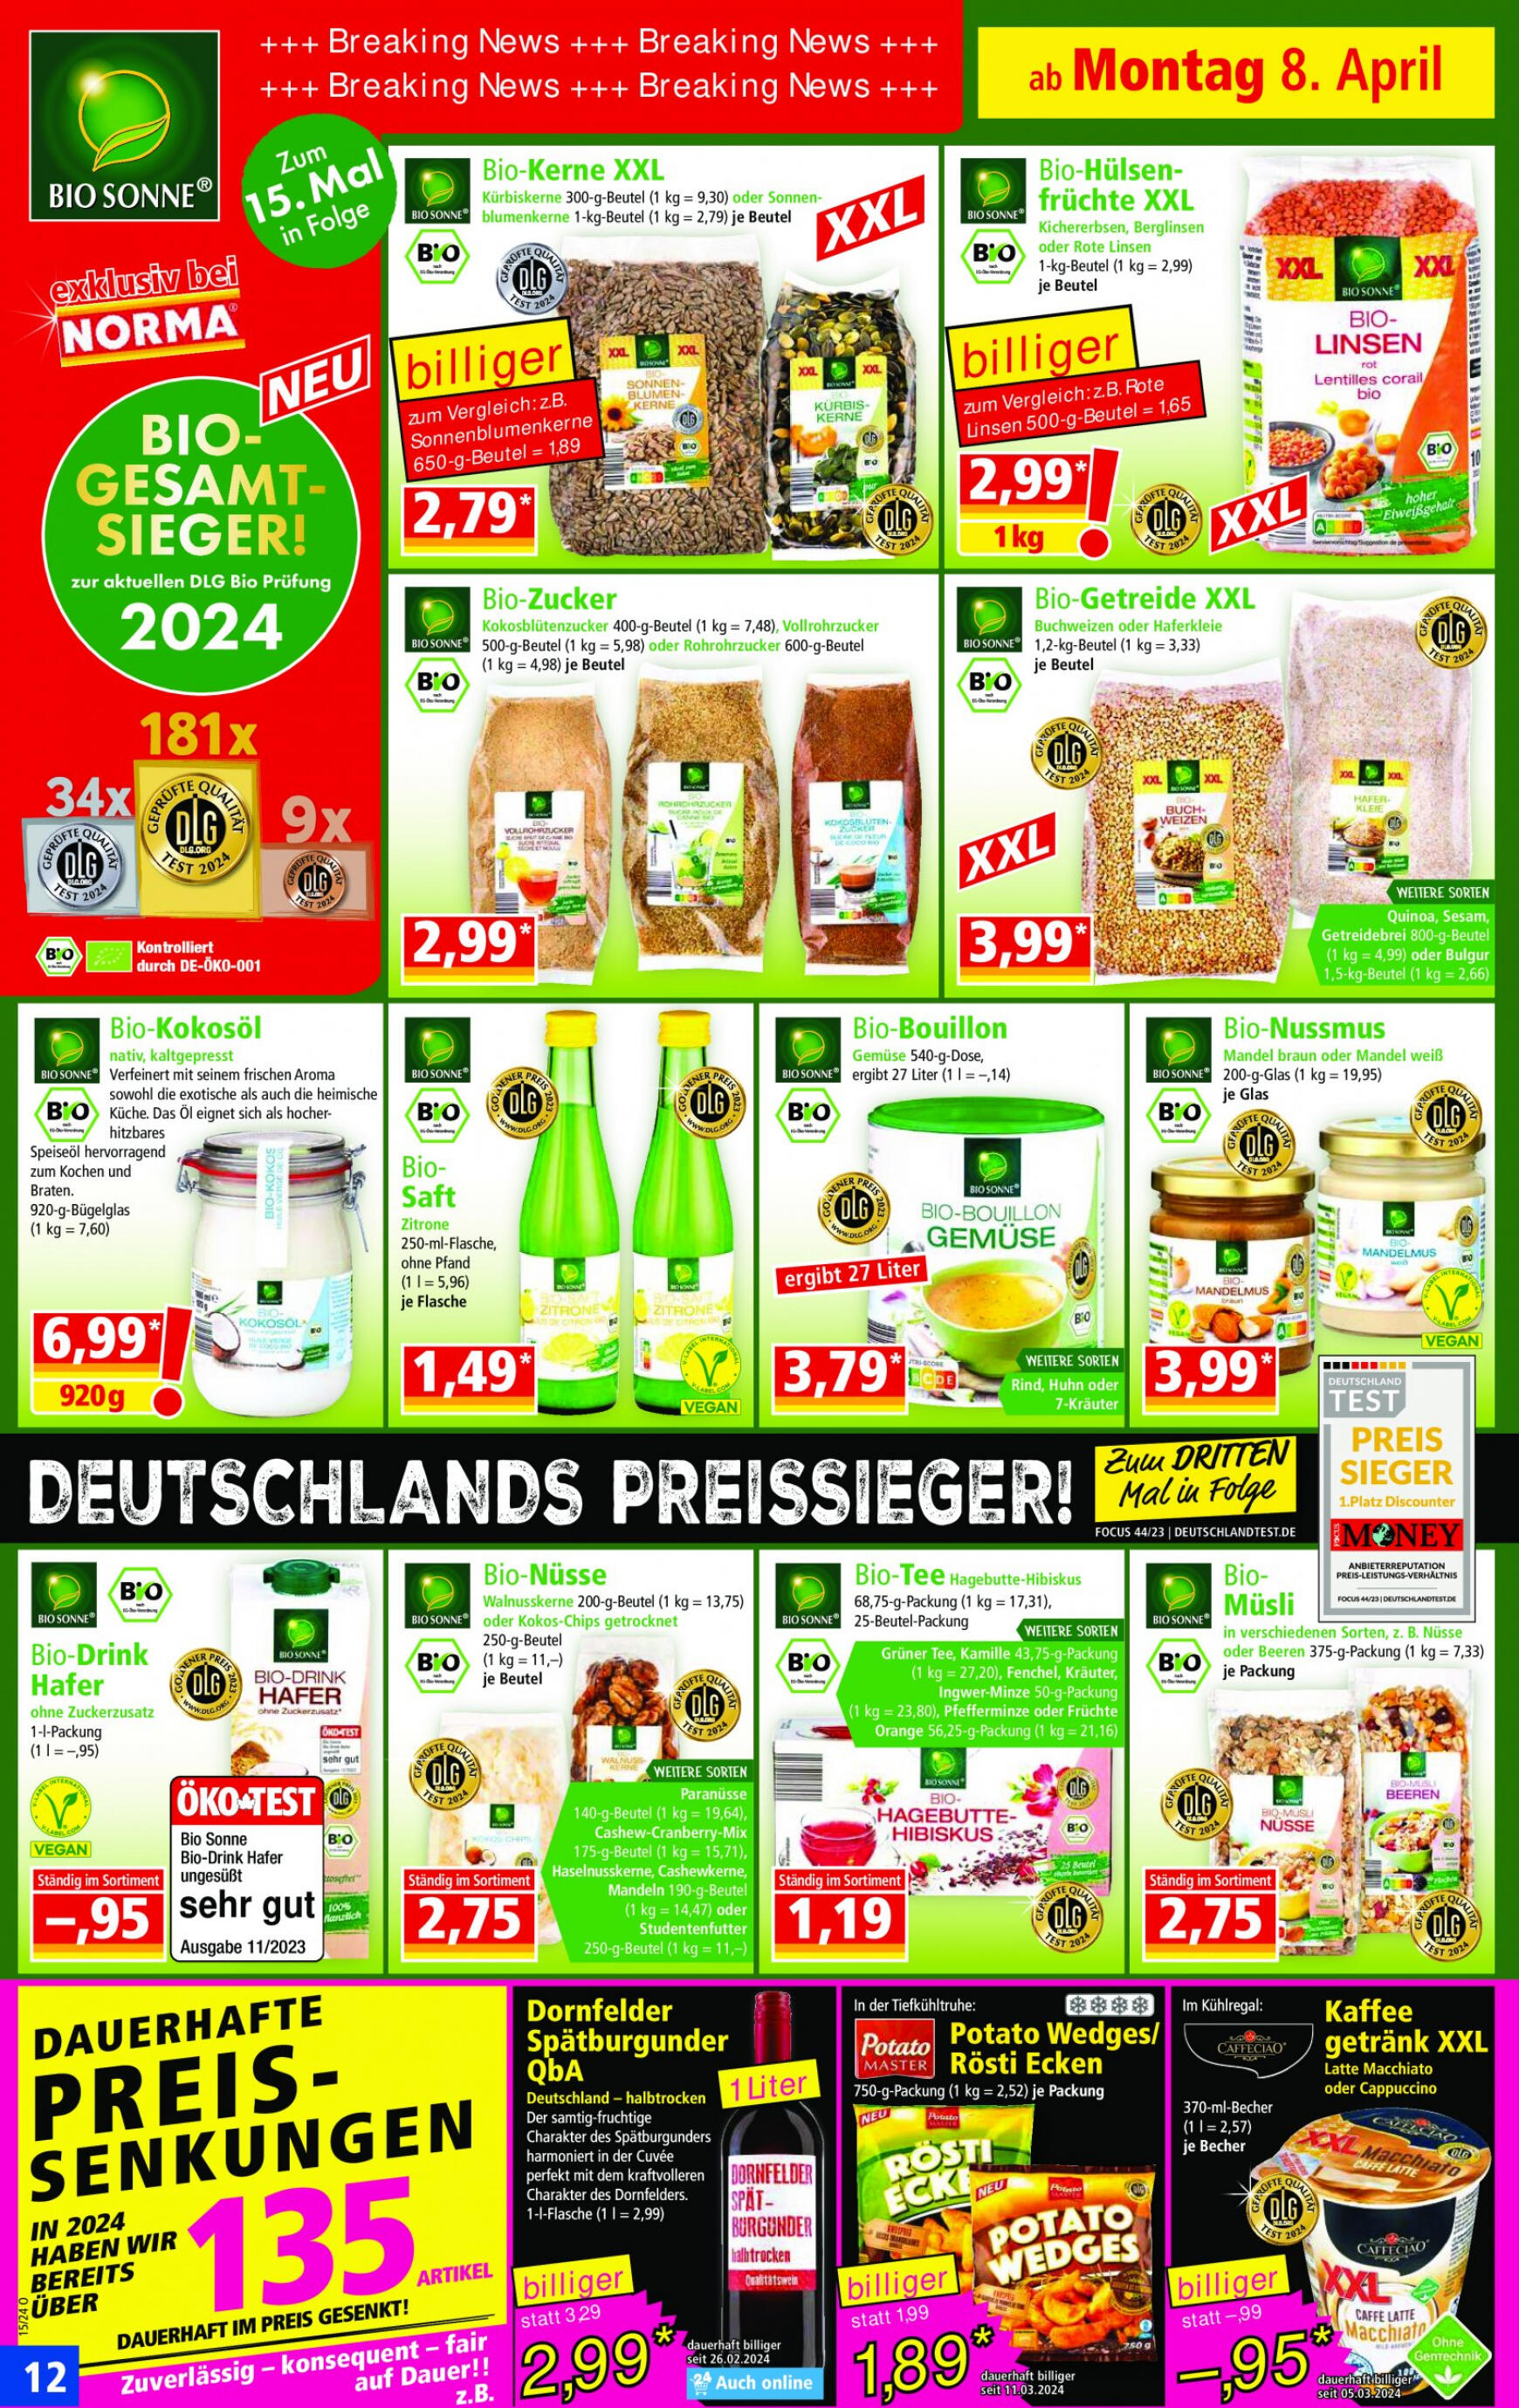 norma - Flyer Norma aktuell 08.04. - 13.04. - page: 12